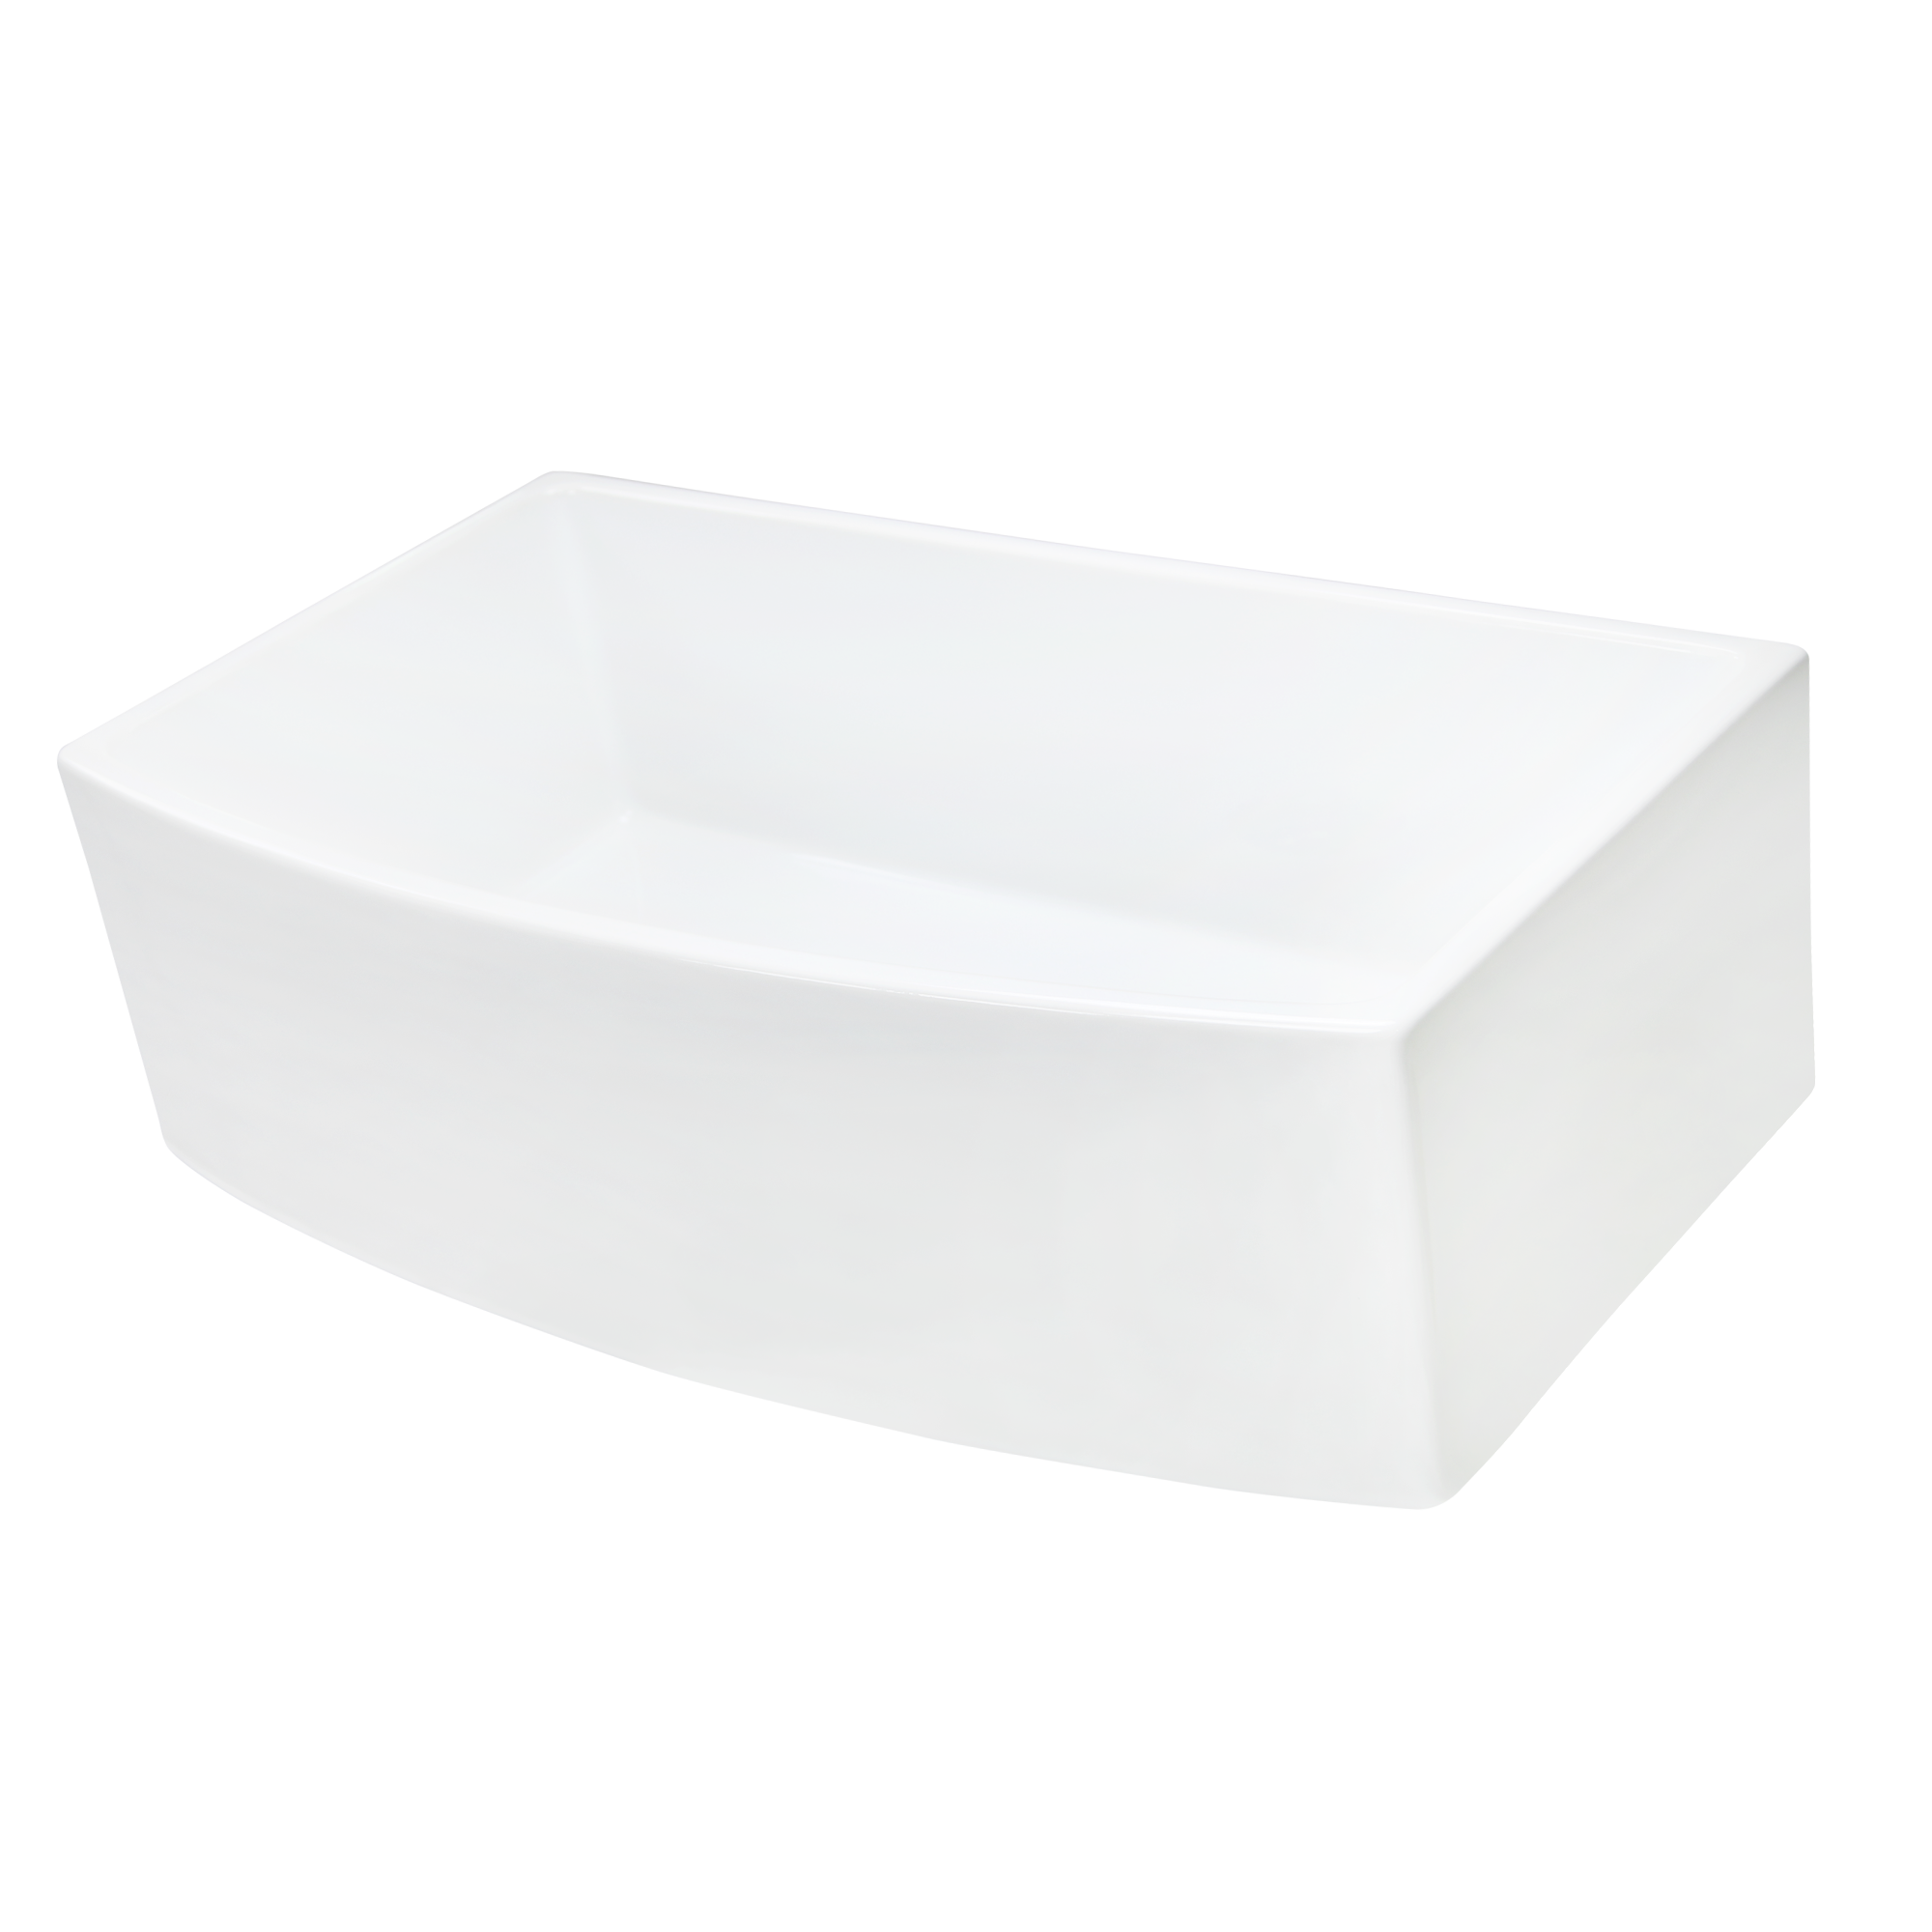 Nantucket Sinks 33 Inch White Farmhouse Fireclay Sink with Curved Apron